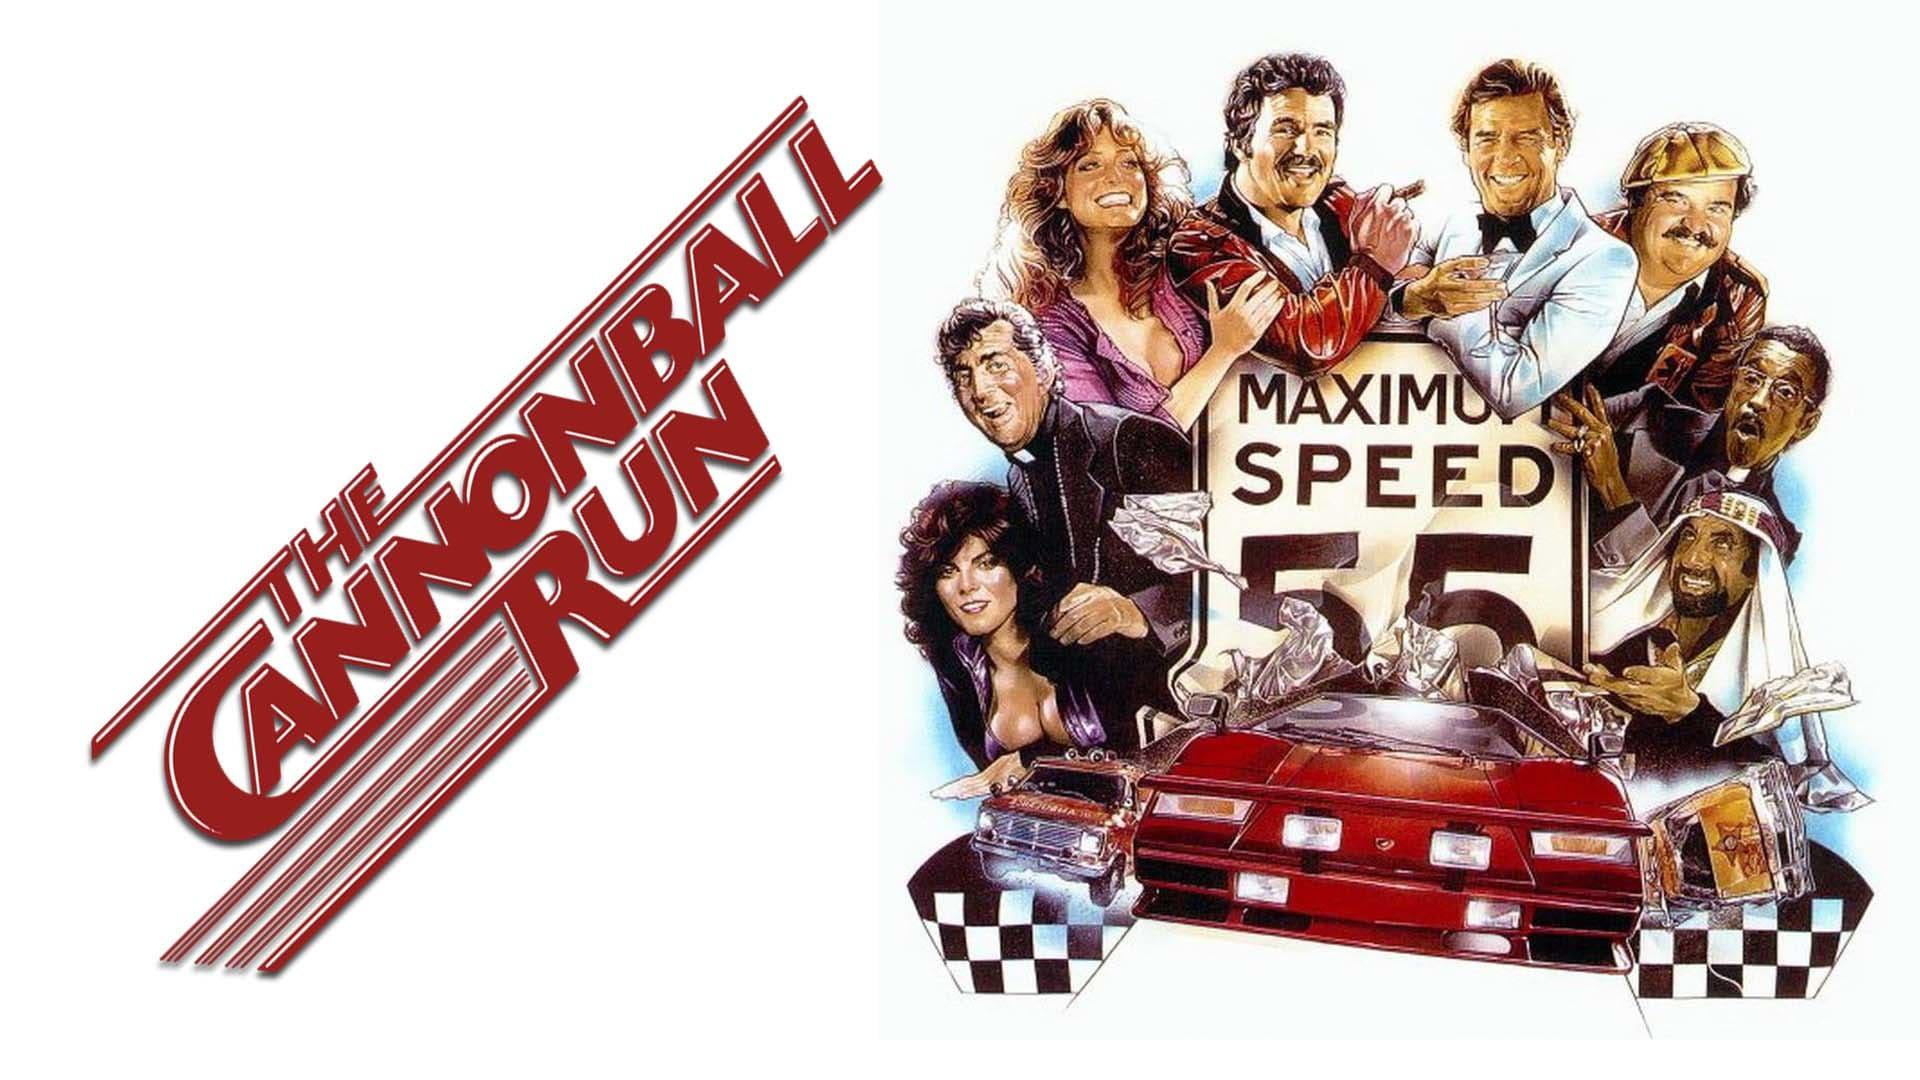 Backdrop Image for The Cannonball Run